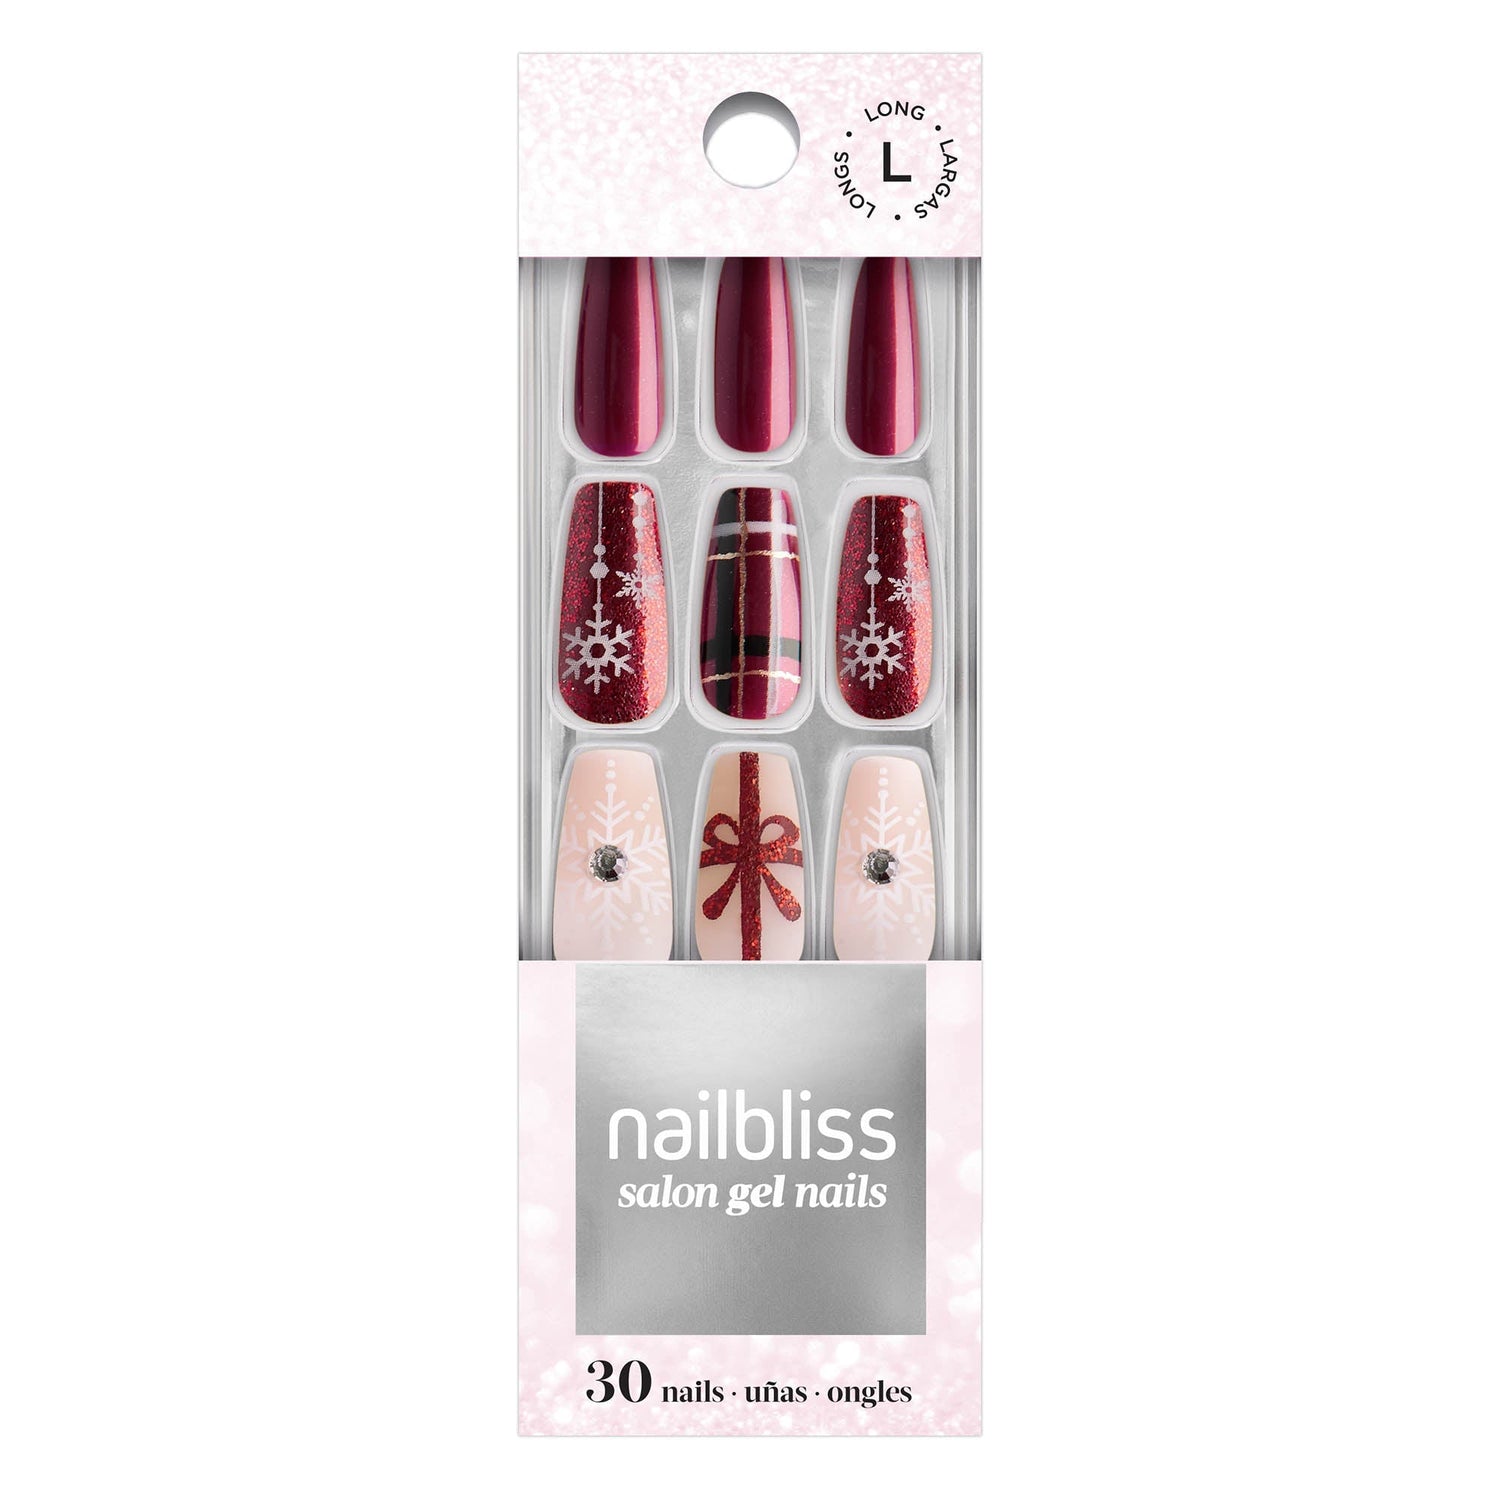  Long length, square shape, glossy finish red glue-on gel nails 